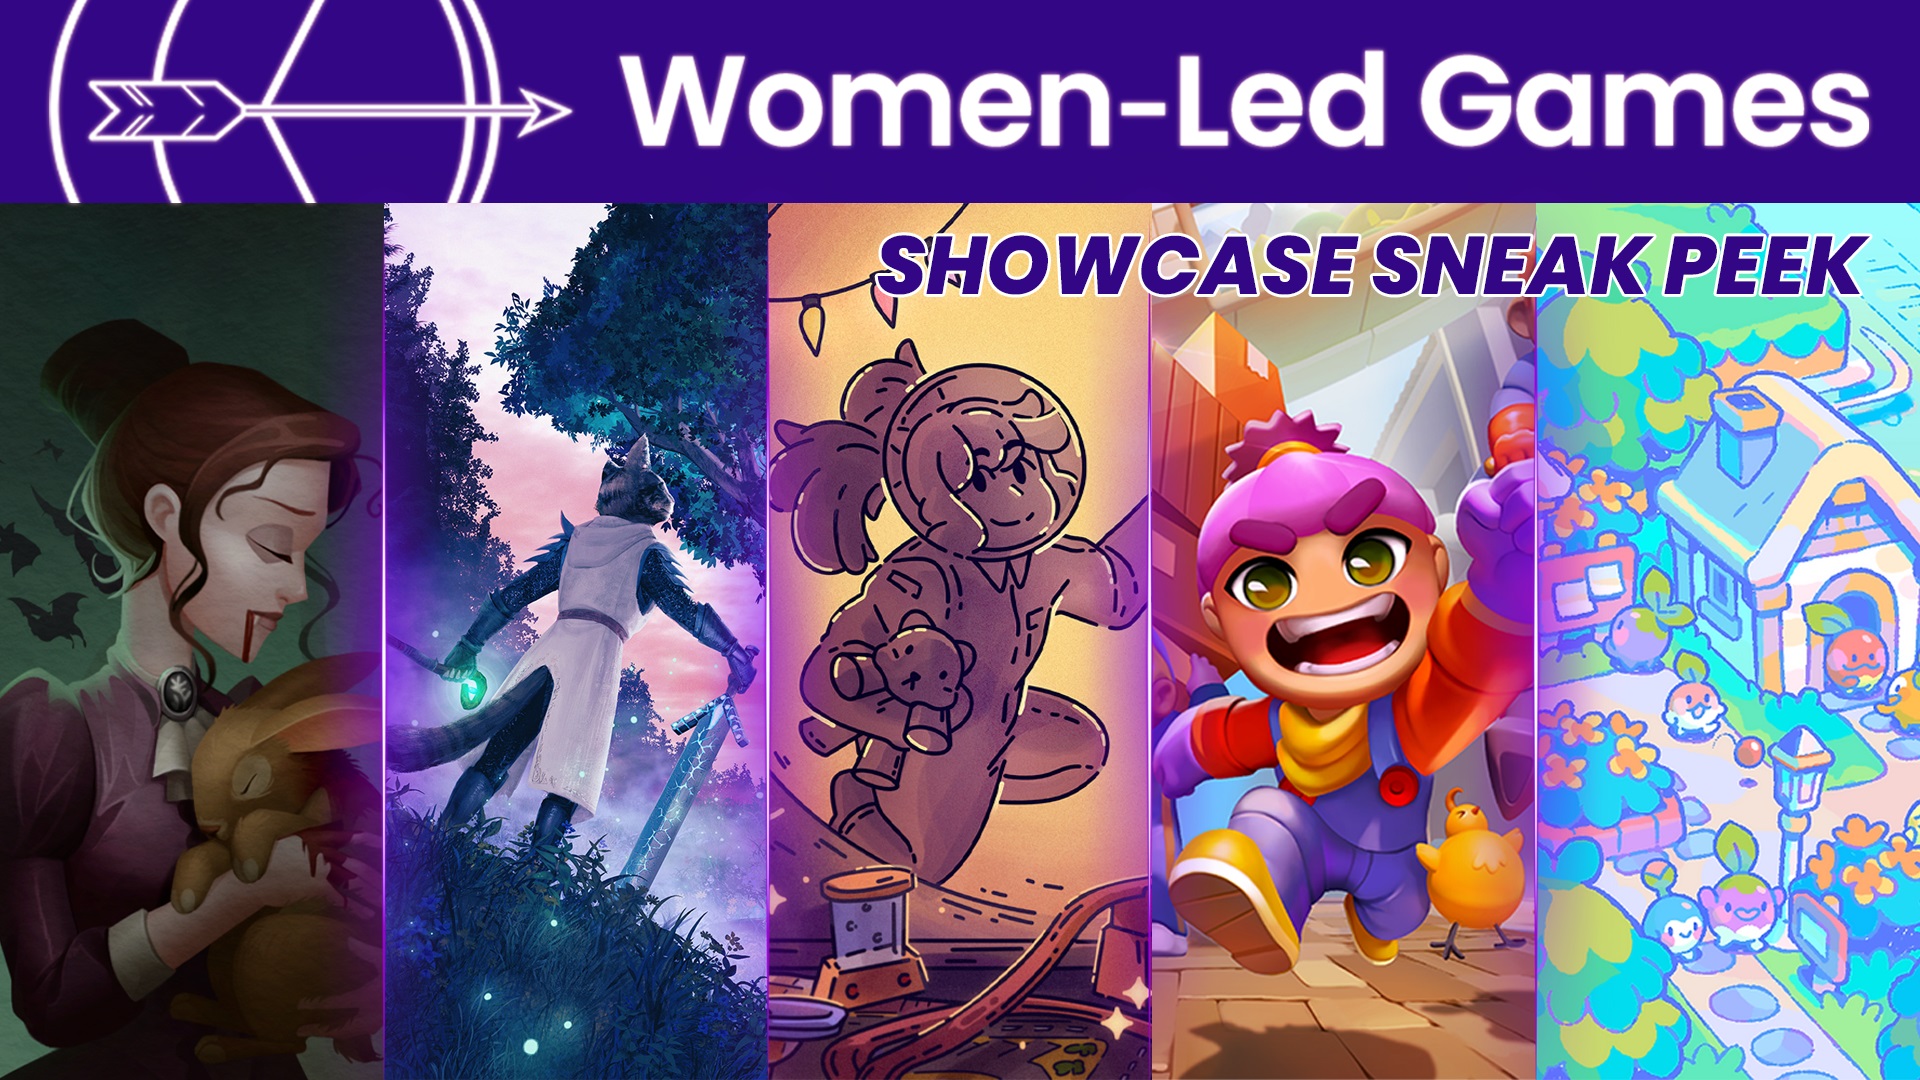 Women’s Day Steam Sale features over 400 games by women-led devs